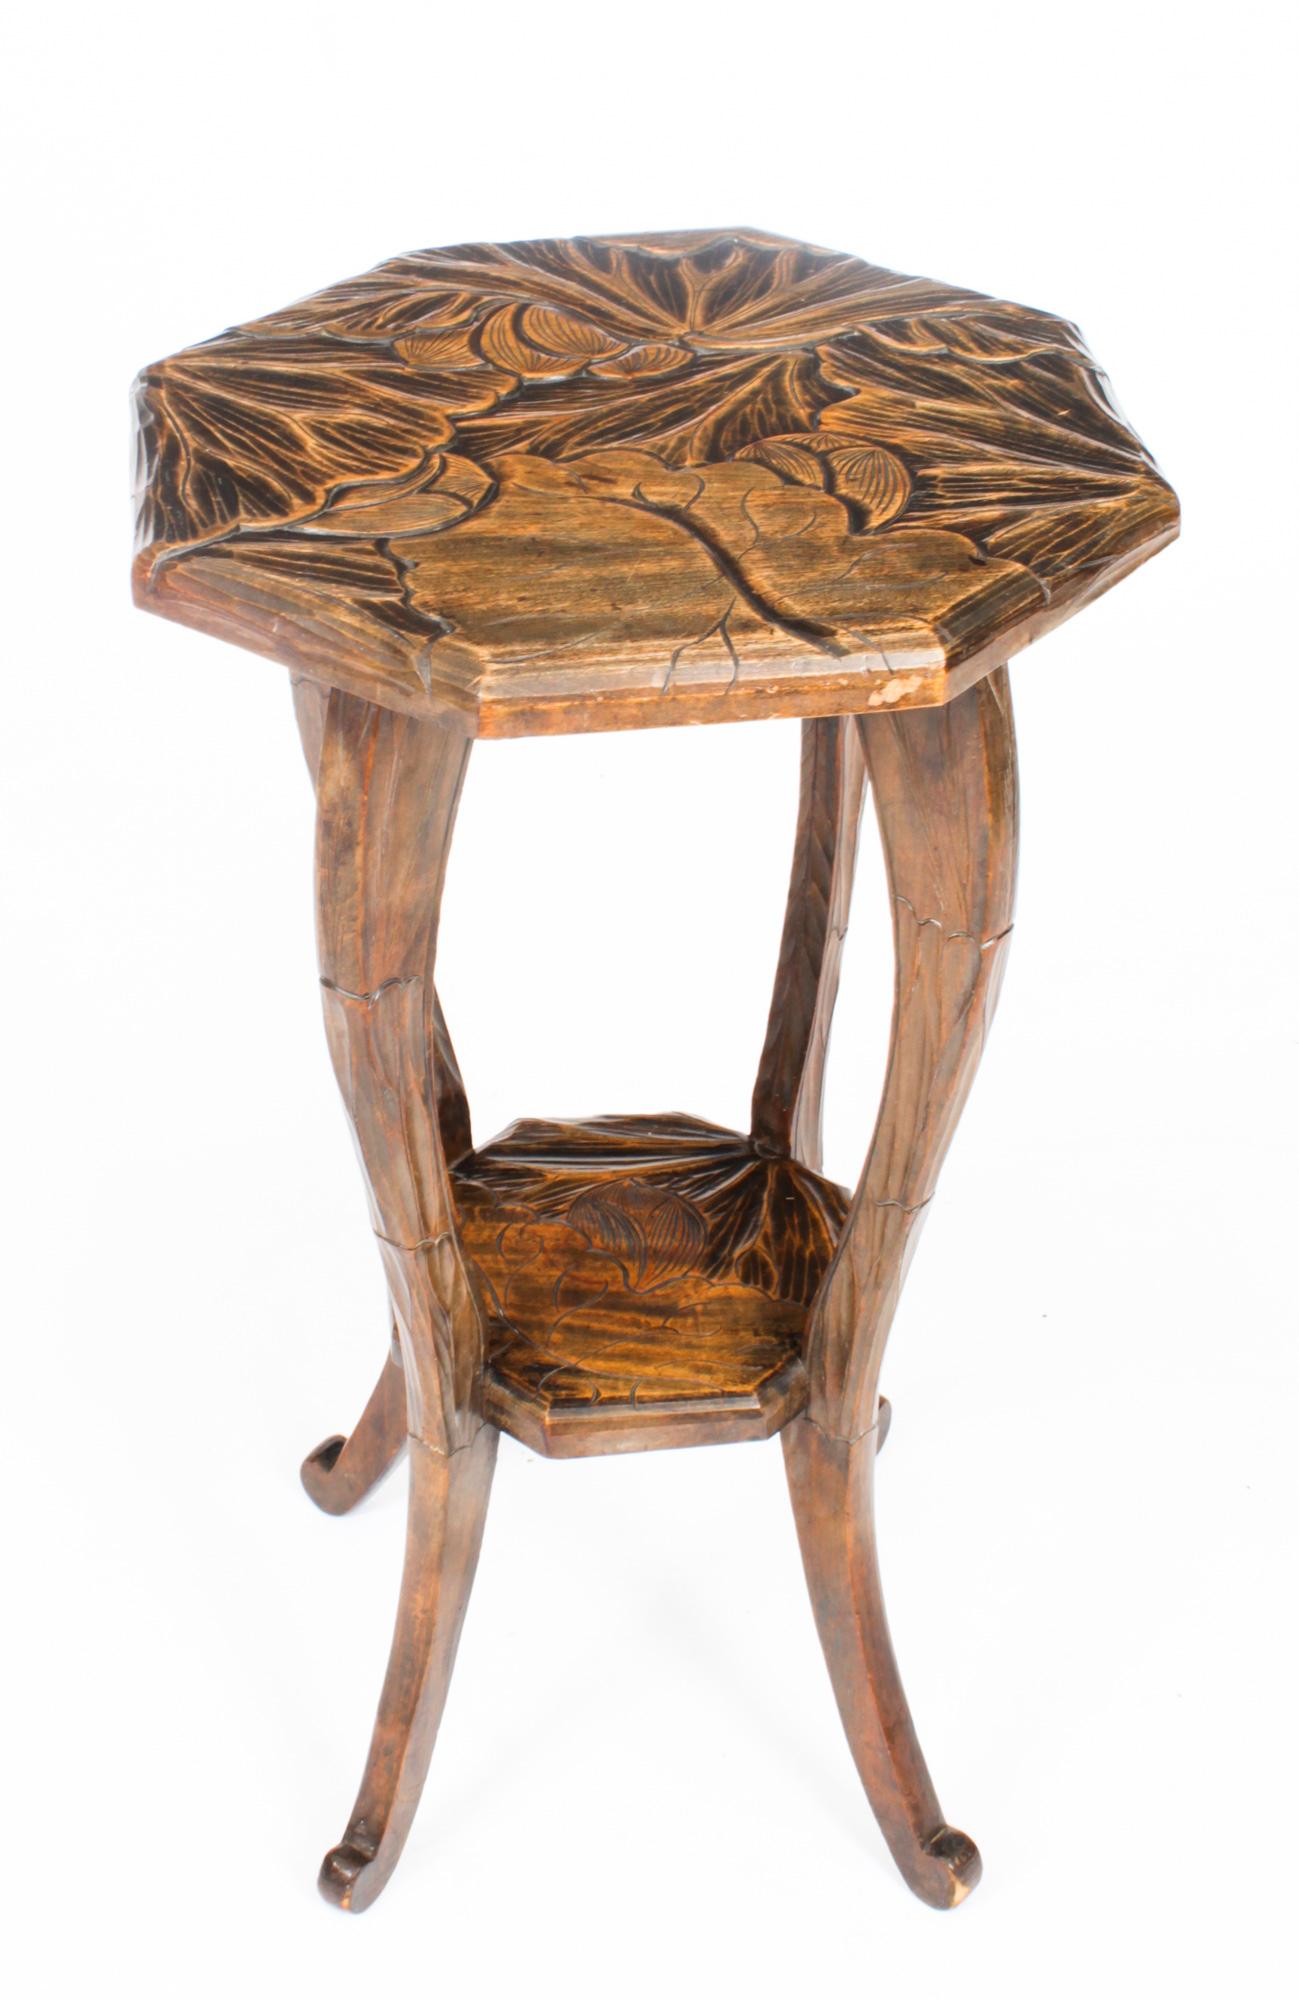 This is a decorative antique Art Nouveau Occasional Table, circa 1900 in date.
 
The octangonal solid walnut shaped top is deeply carved with a leaf motif, on four exaggerated cabriole legs united by a matching undertier.
 
Add some Art Nouveau